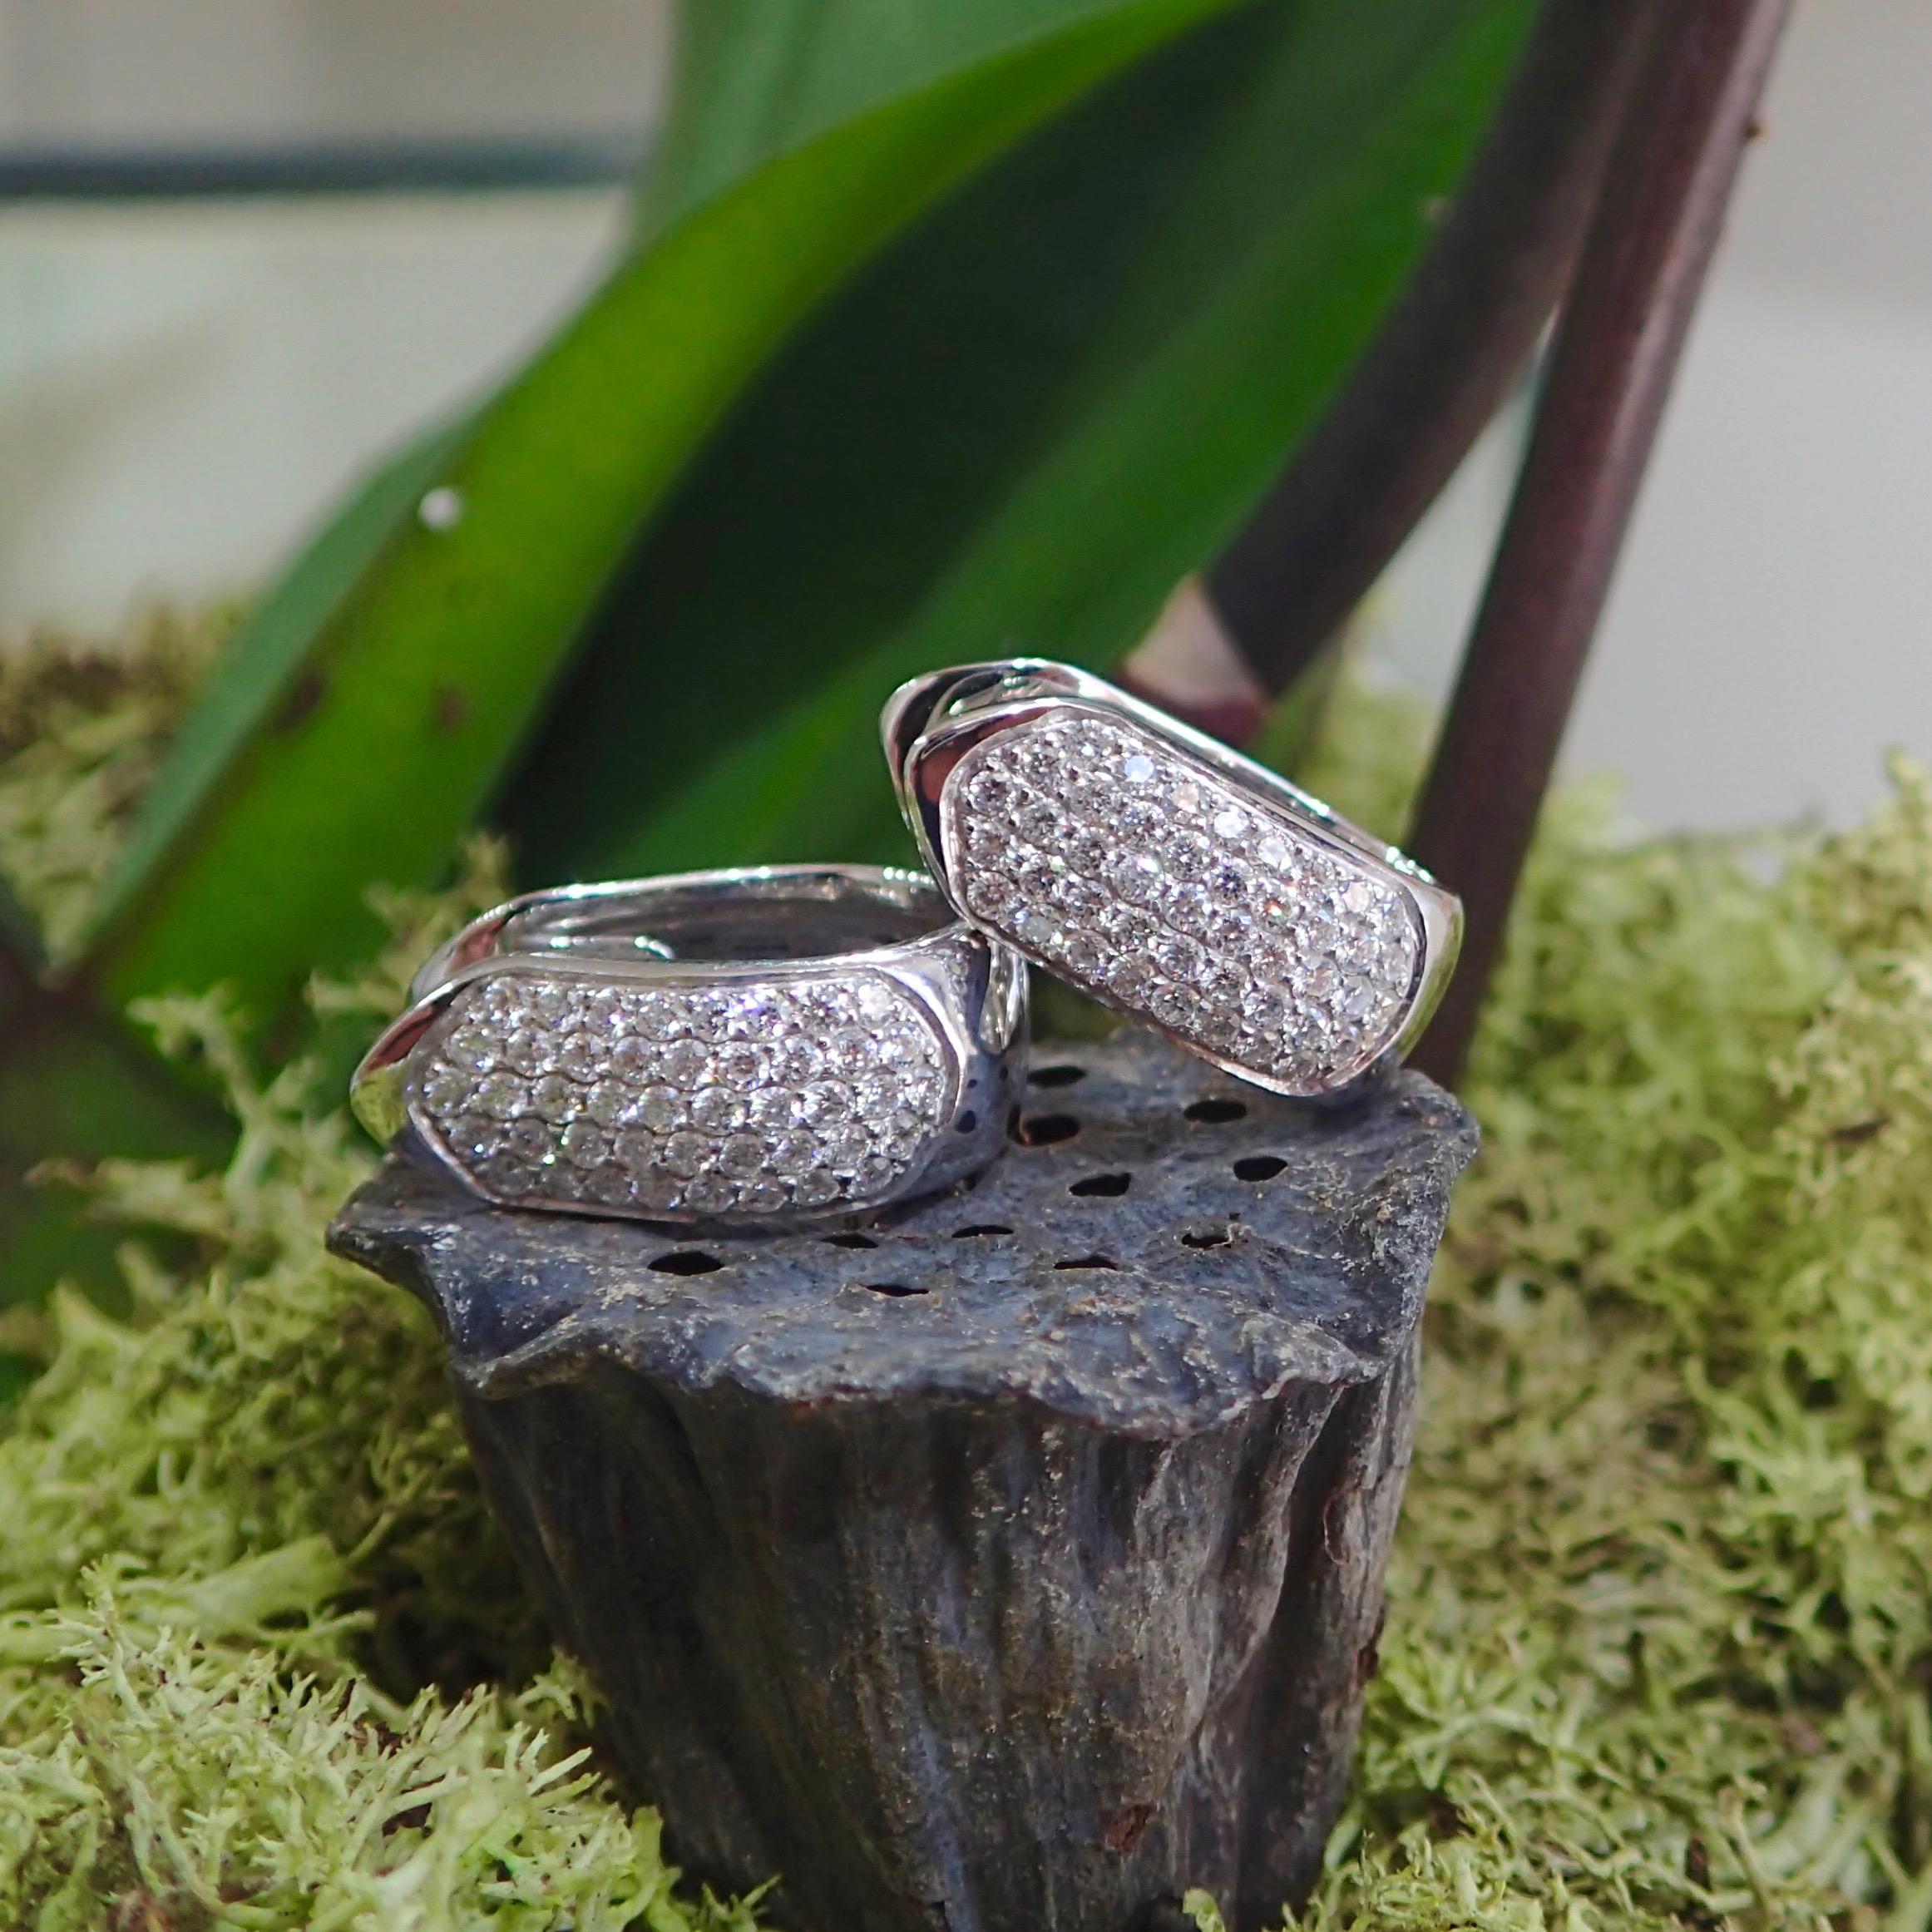 A pair of 18k white gold peak-top huggie earrings are set with eighty-eight (88) Round Brilliant Cut diamond weighing a total of 0.84 carats with Clarity Grade VS and Color Grade G. The earrings are 17.93mm tall and 7.30mm wide and weigh 8.7 grams